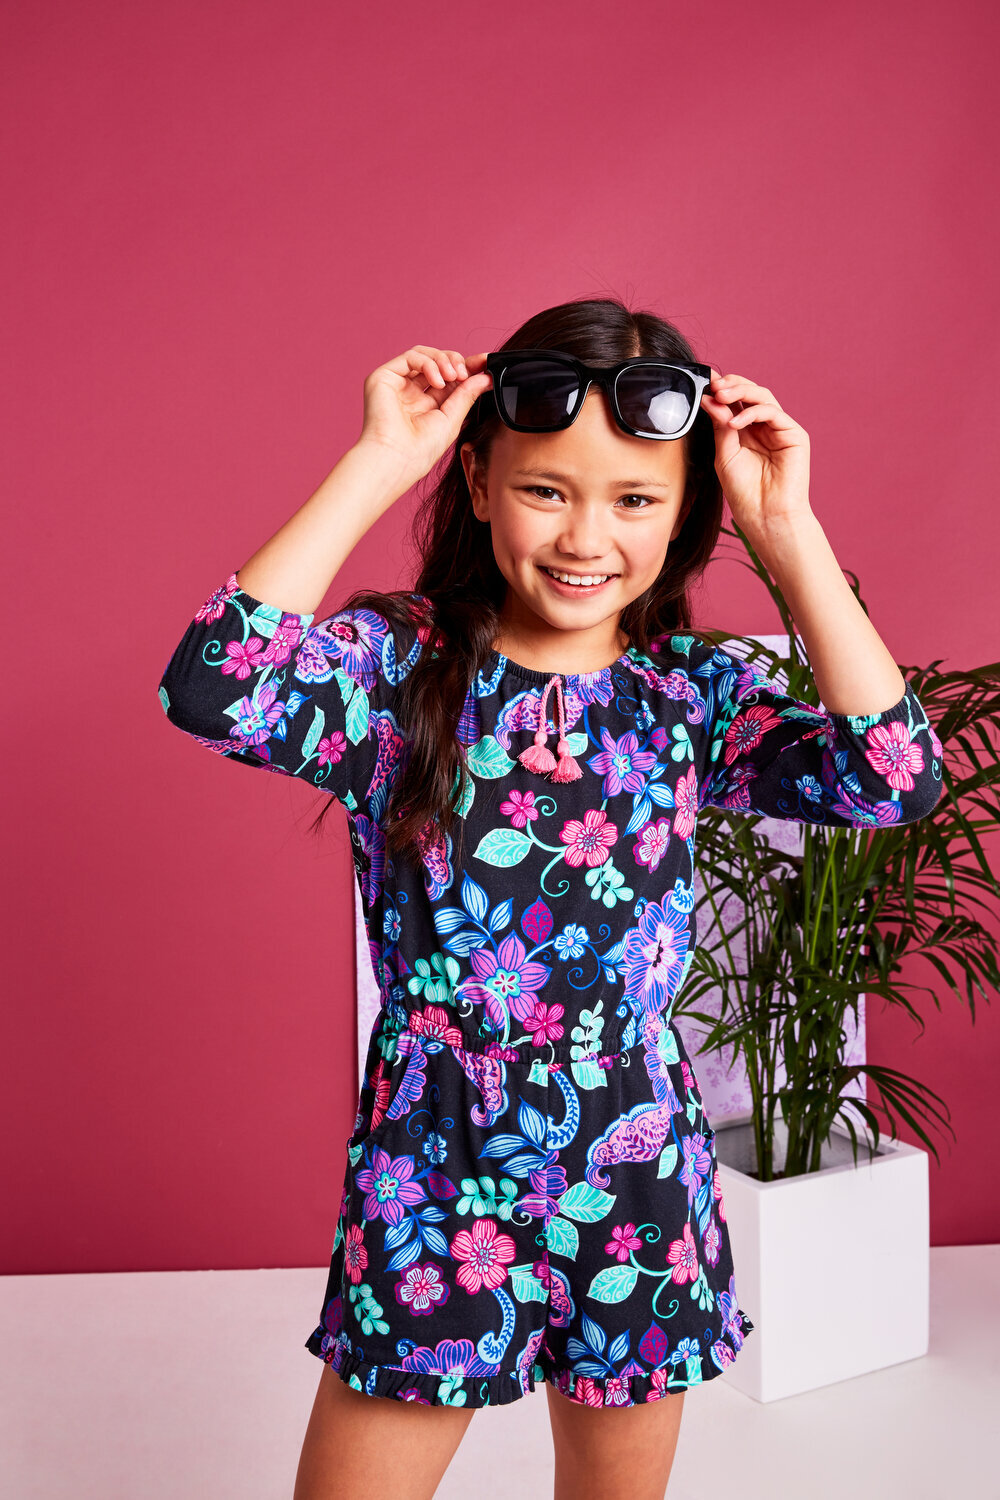 Greer Rivera Photography Kids Editorial Photoshoots Marin  Girl in flower romper holding glasses on her forehead